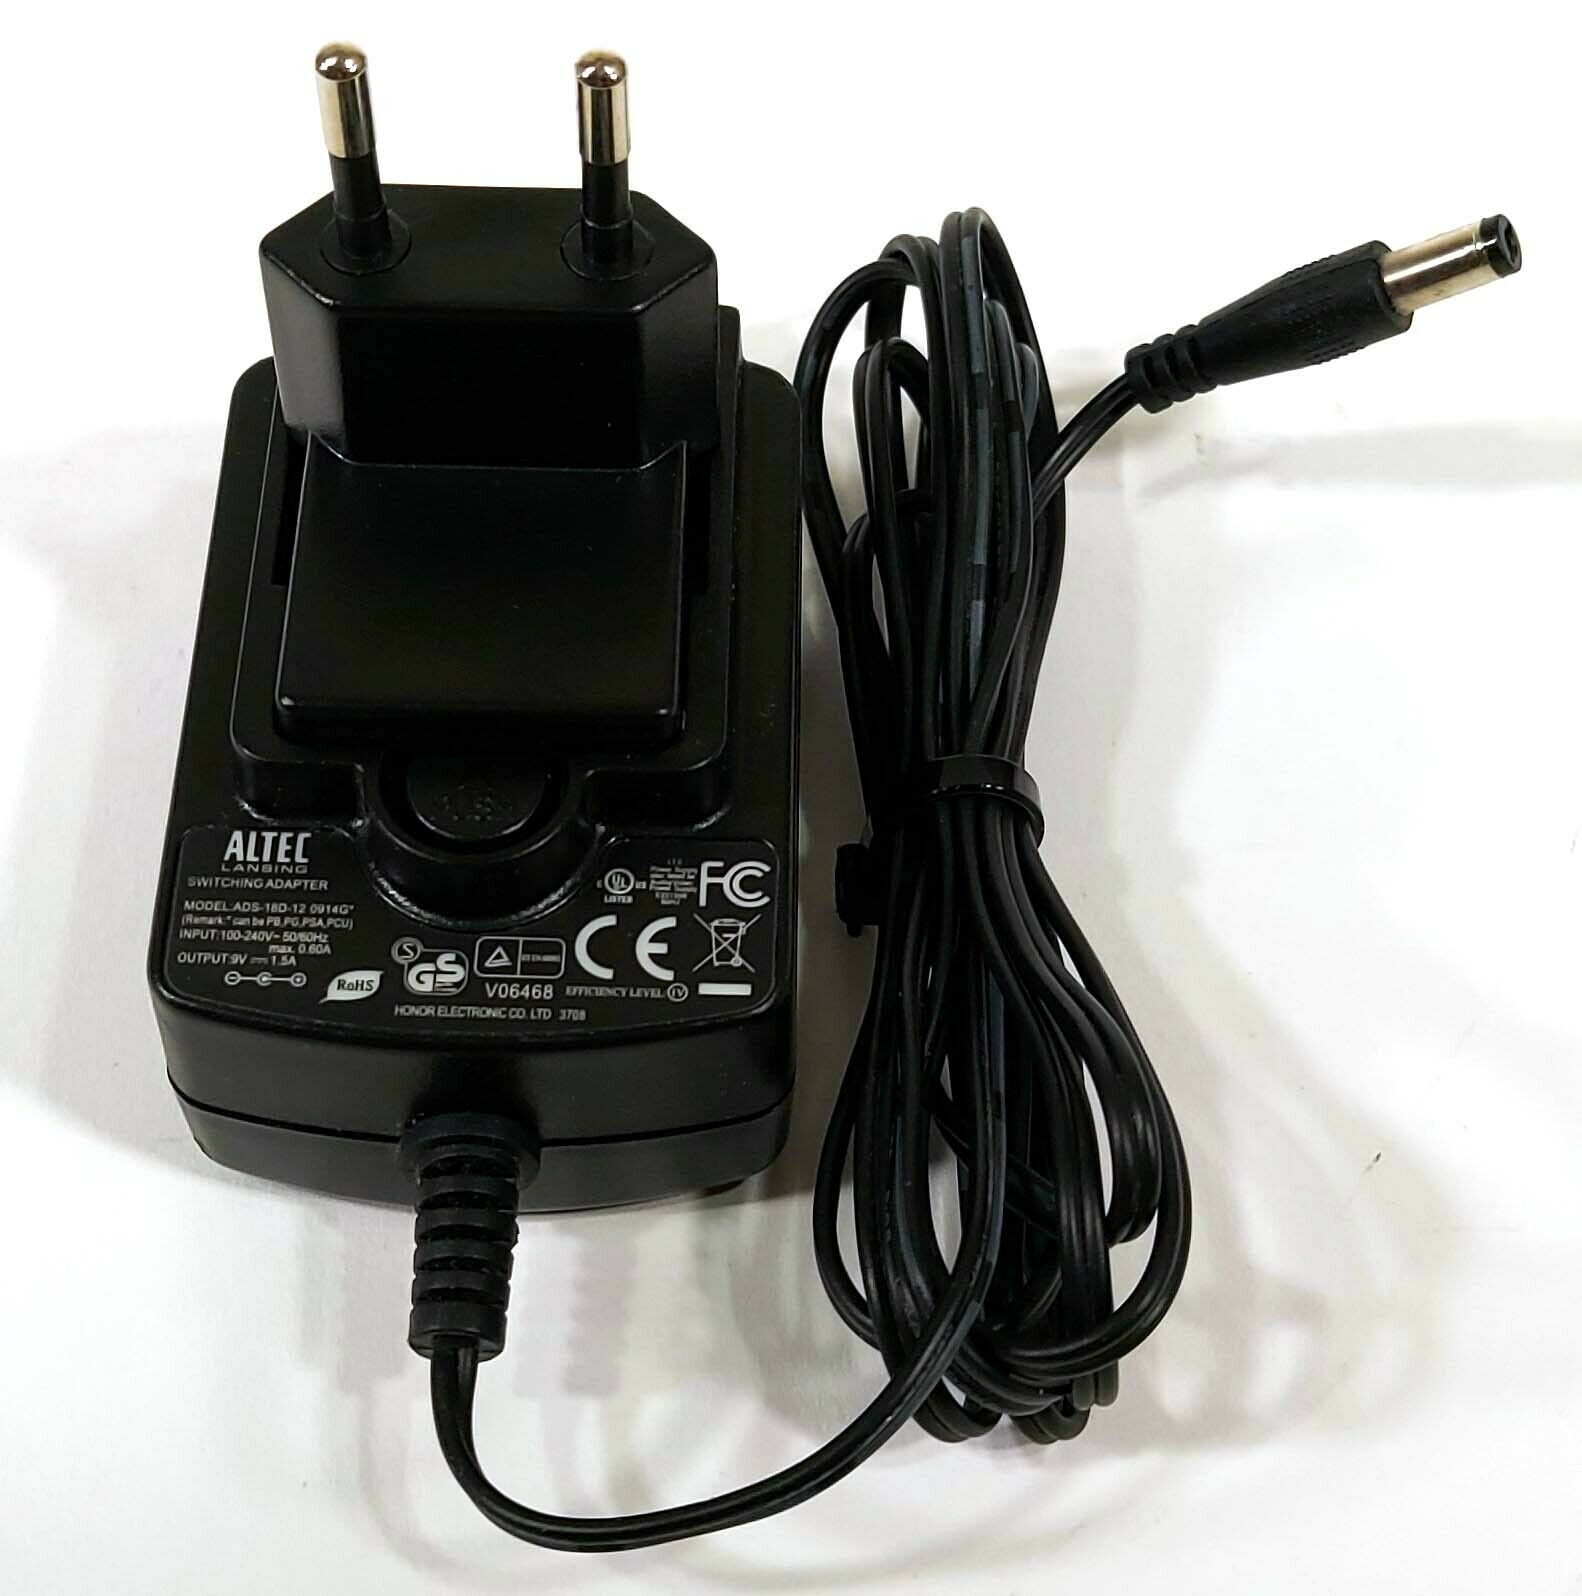 Honor ADS-18D-12 0914G Switching AC/DC Adapter 9V 1.5A Charger Europlug C168 Output Current: 1.5 A Compatible Brand: U